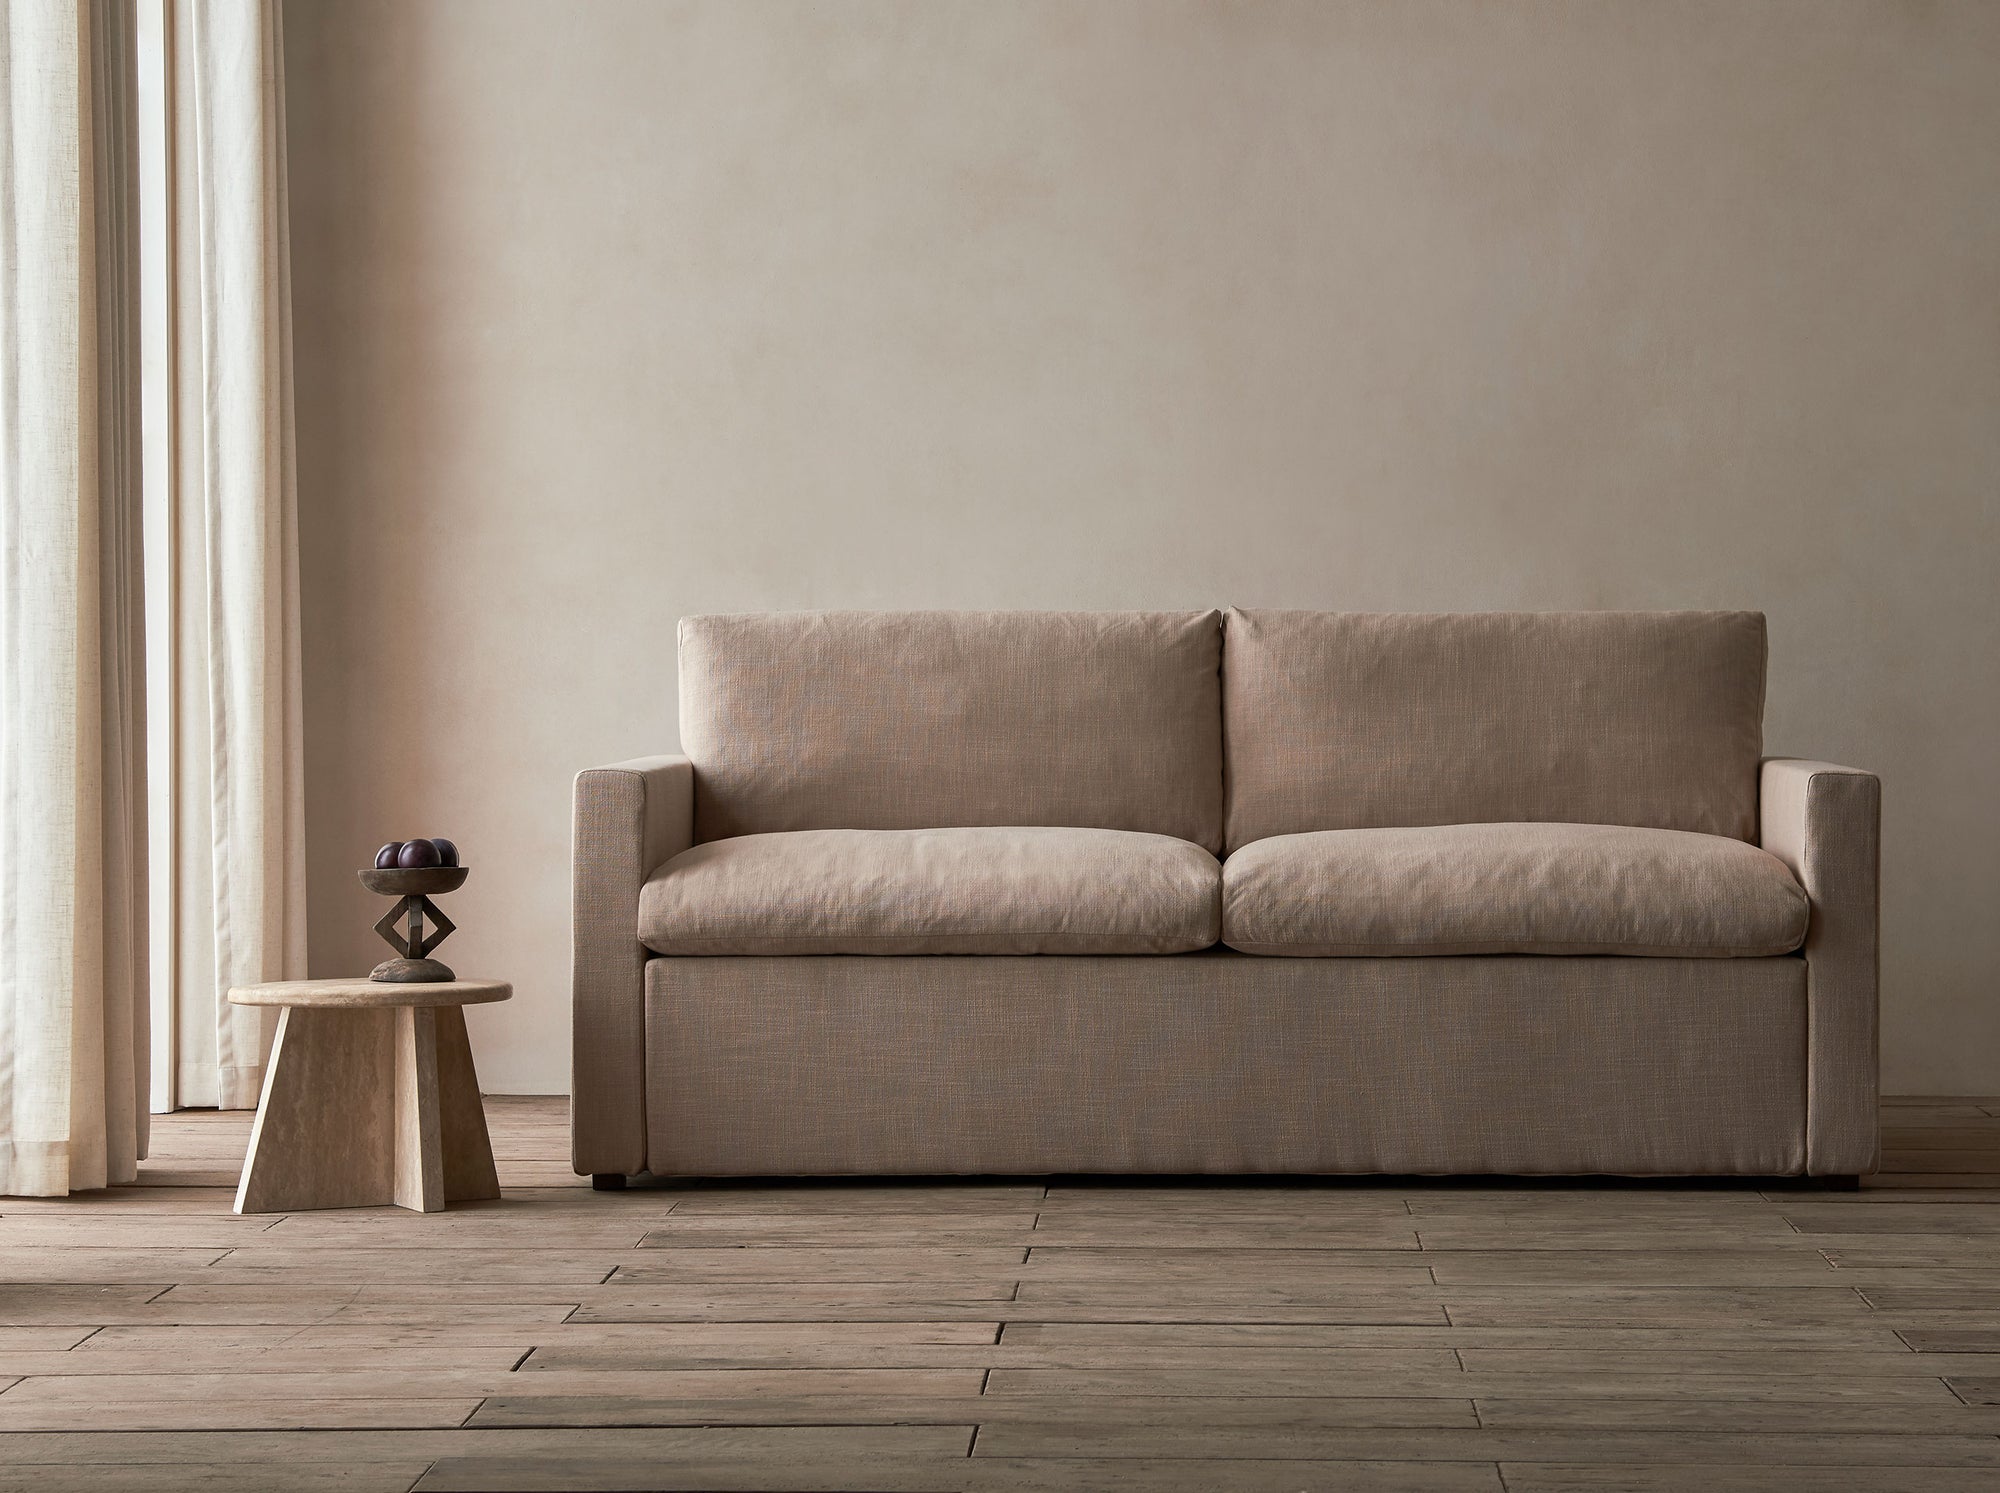 Devyn Sleeper Sofa in Golden Reed, a sandy brown Recycled Poly Linen, in a beige room with a wooden side table.